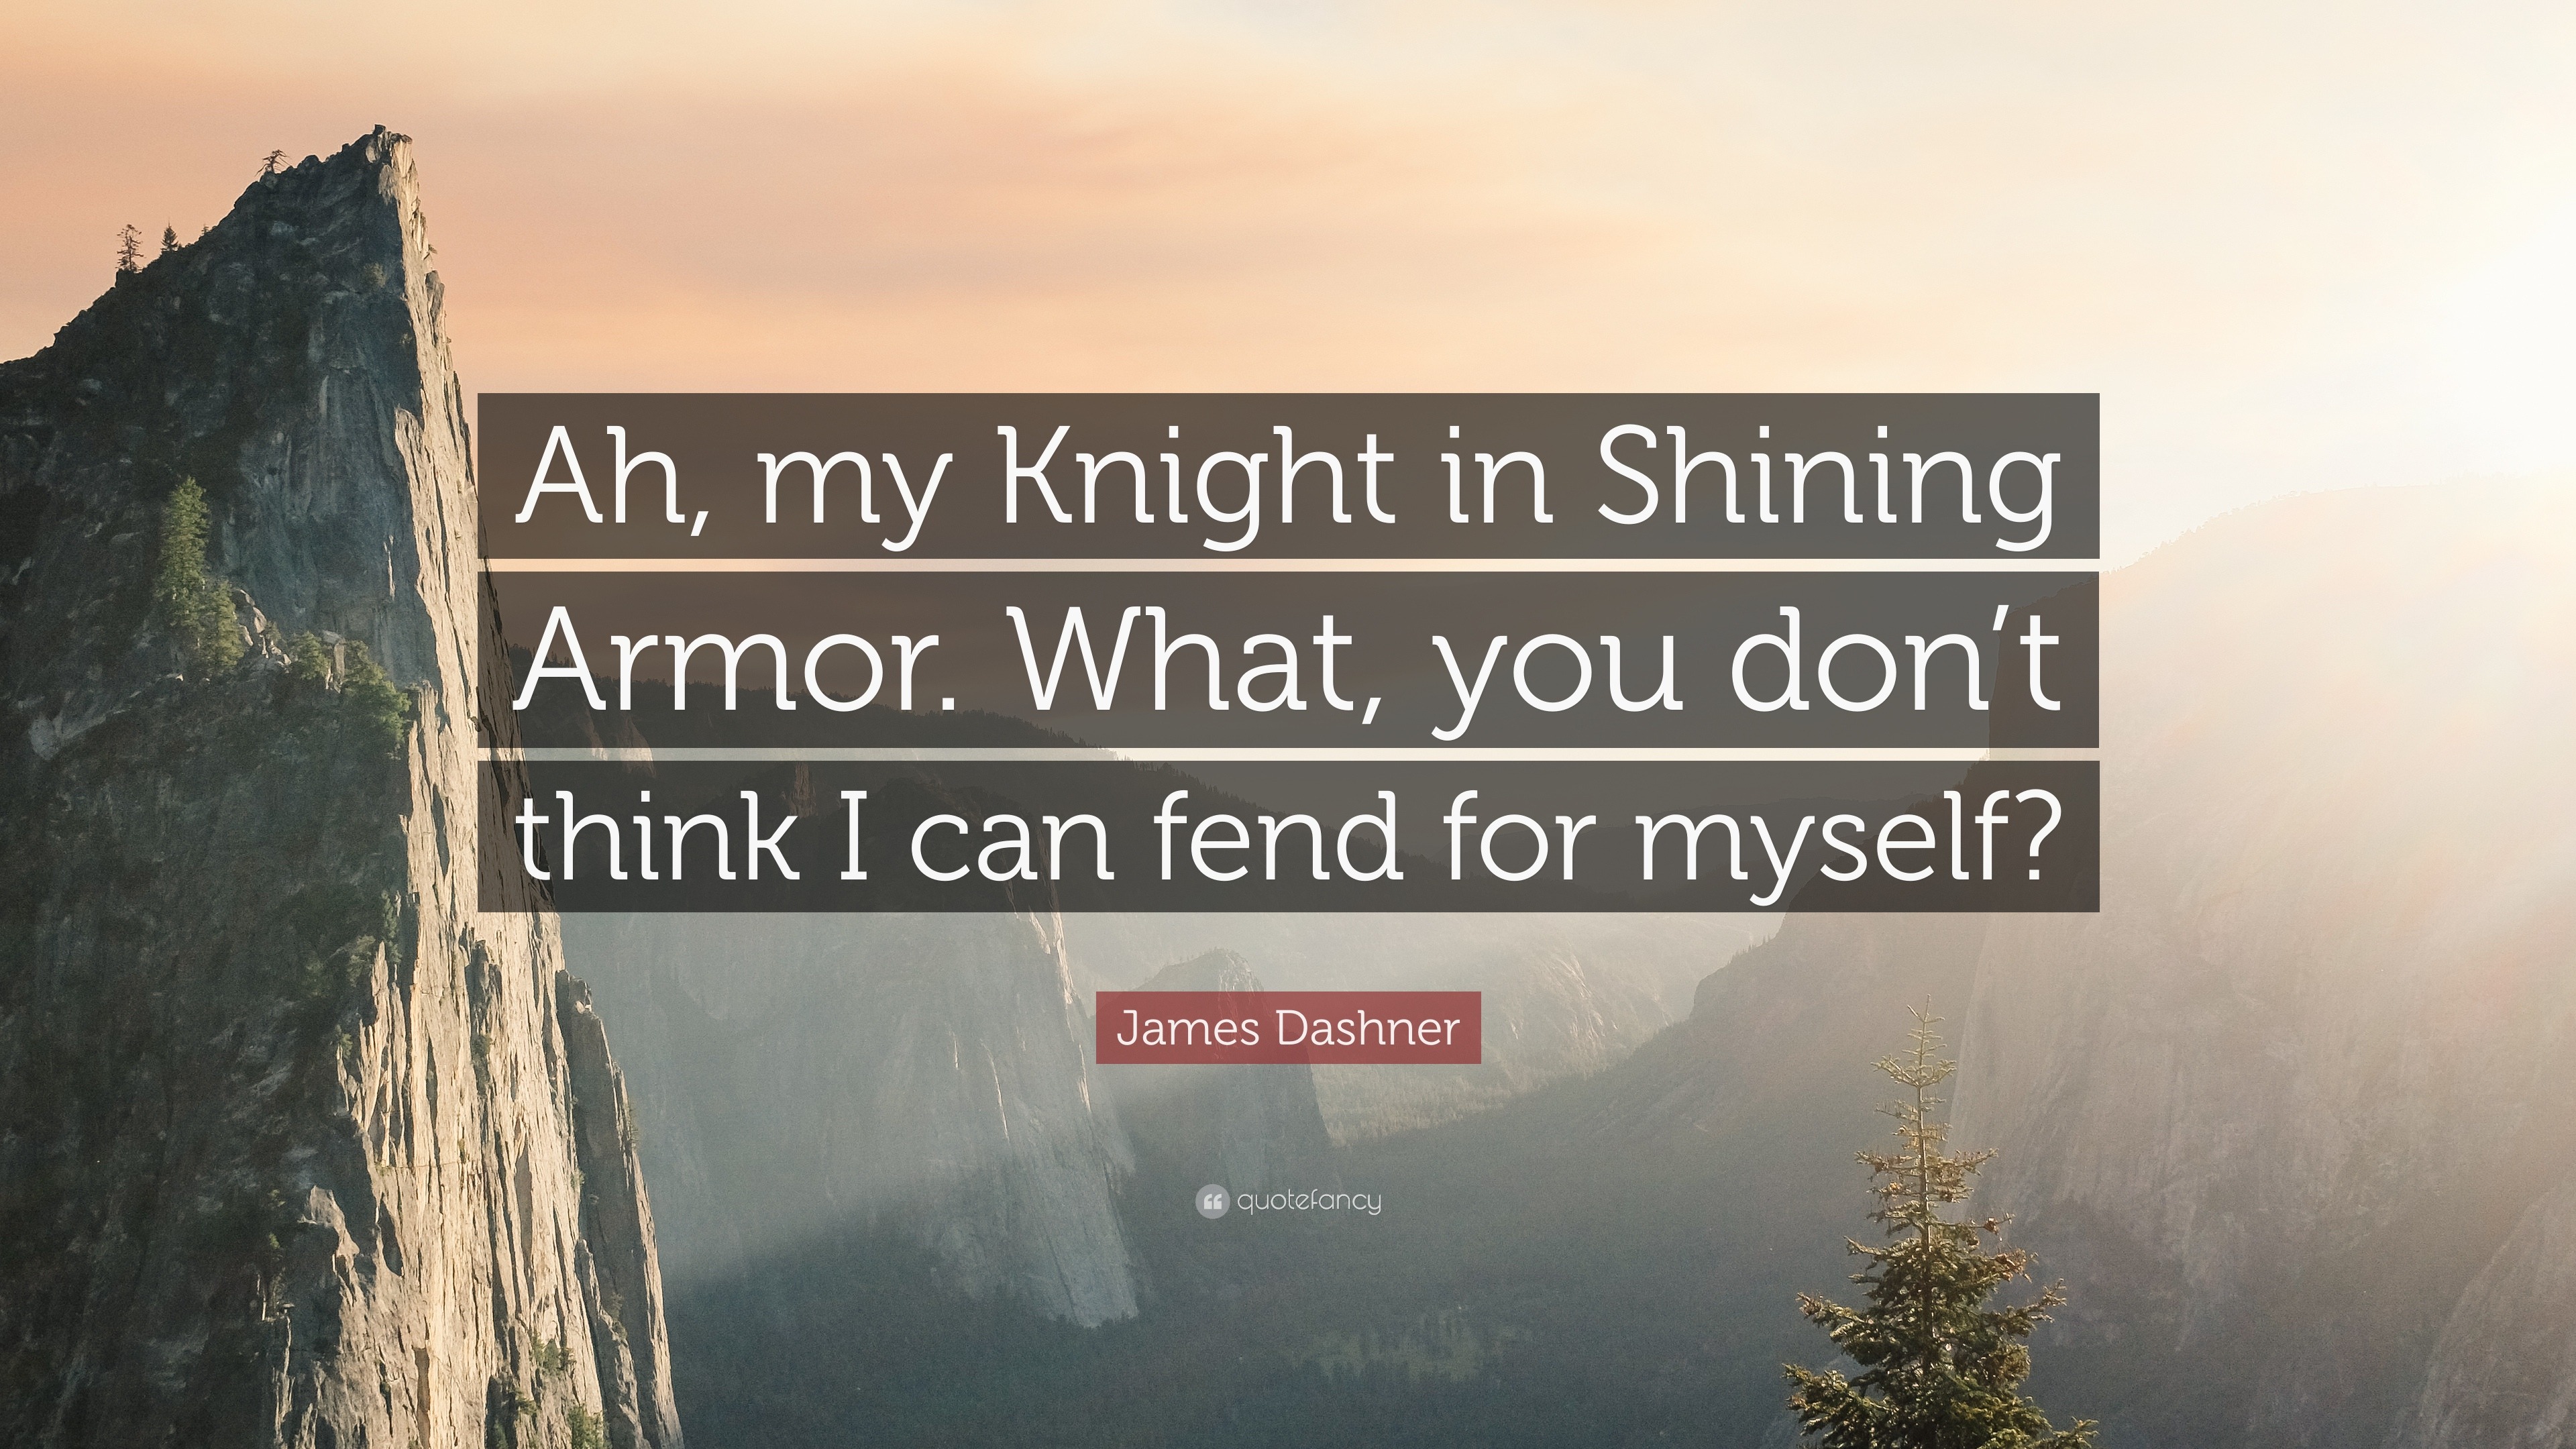 James Dashner Quote: "Ah, my Knight in Shining Armor. What, you don't think I can fend for ...